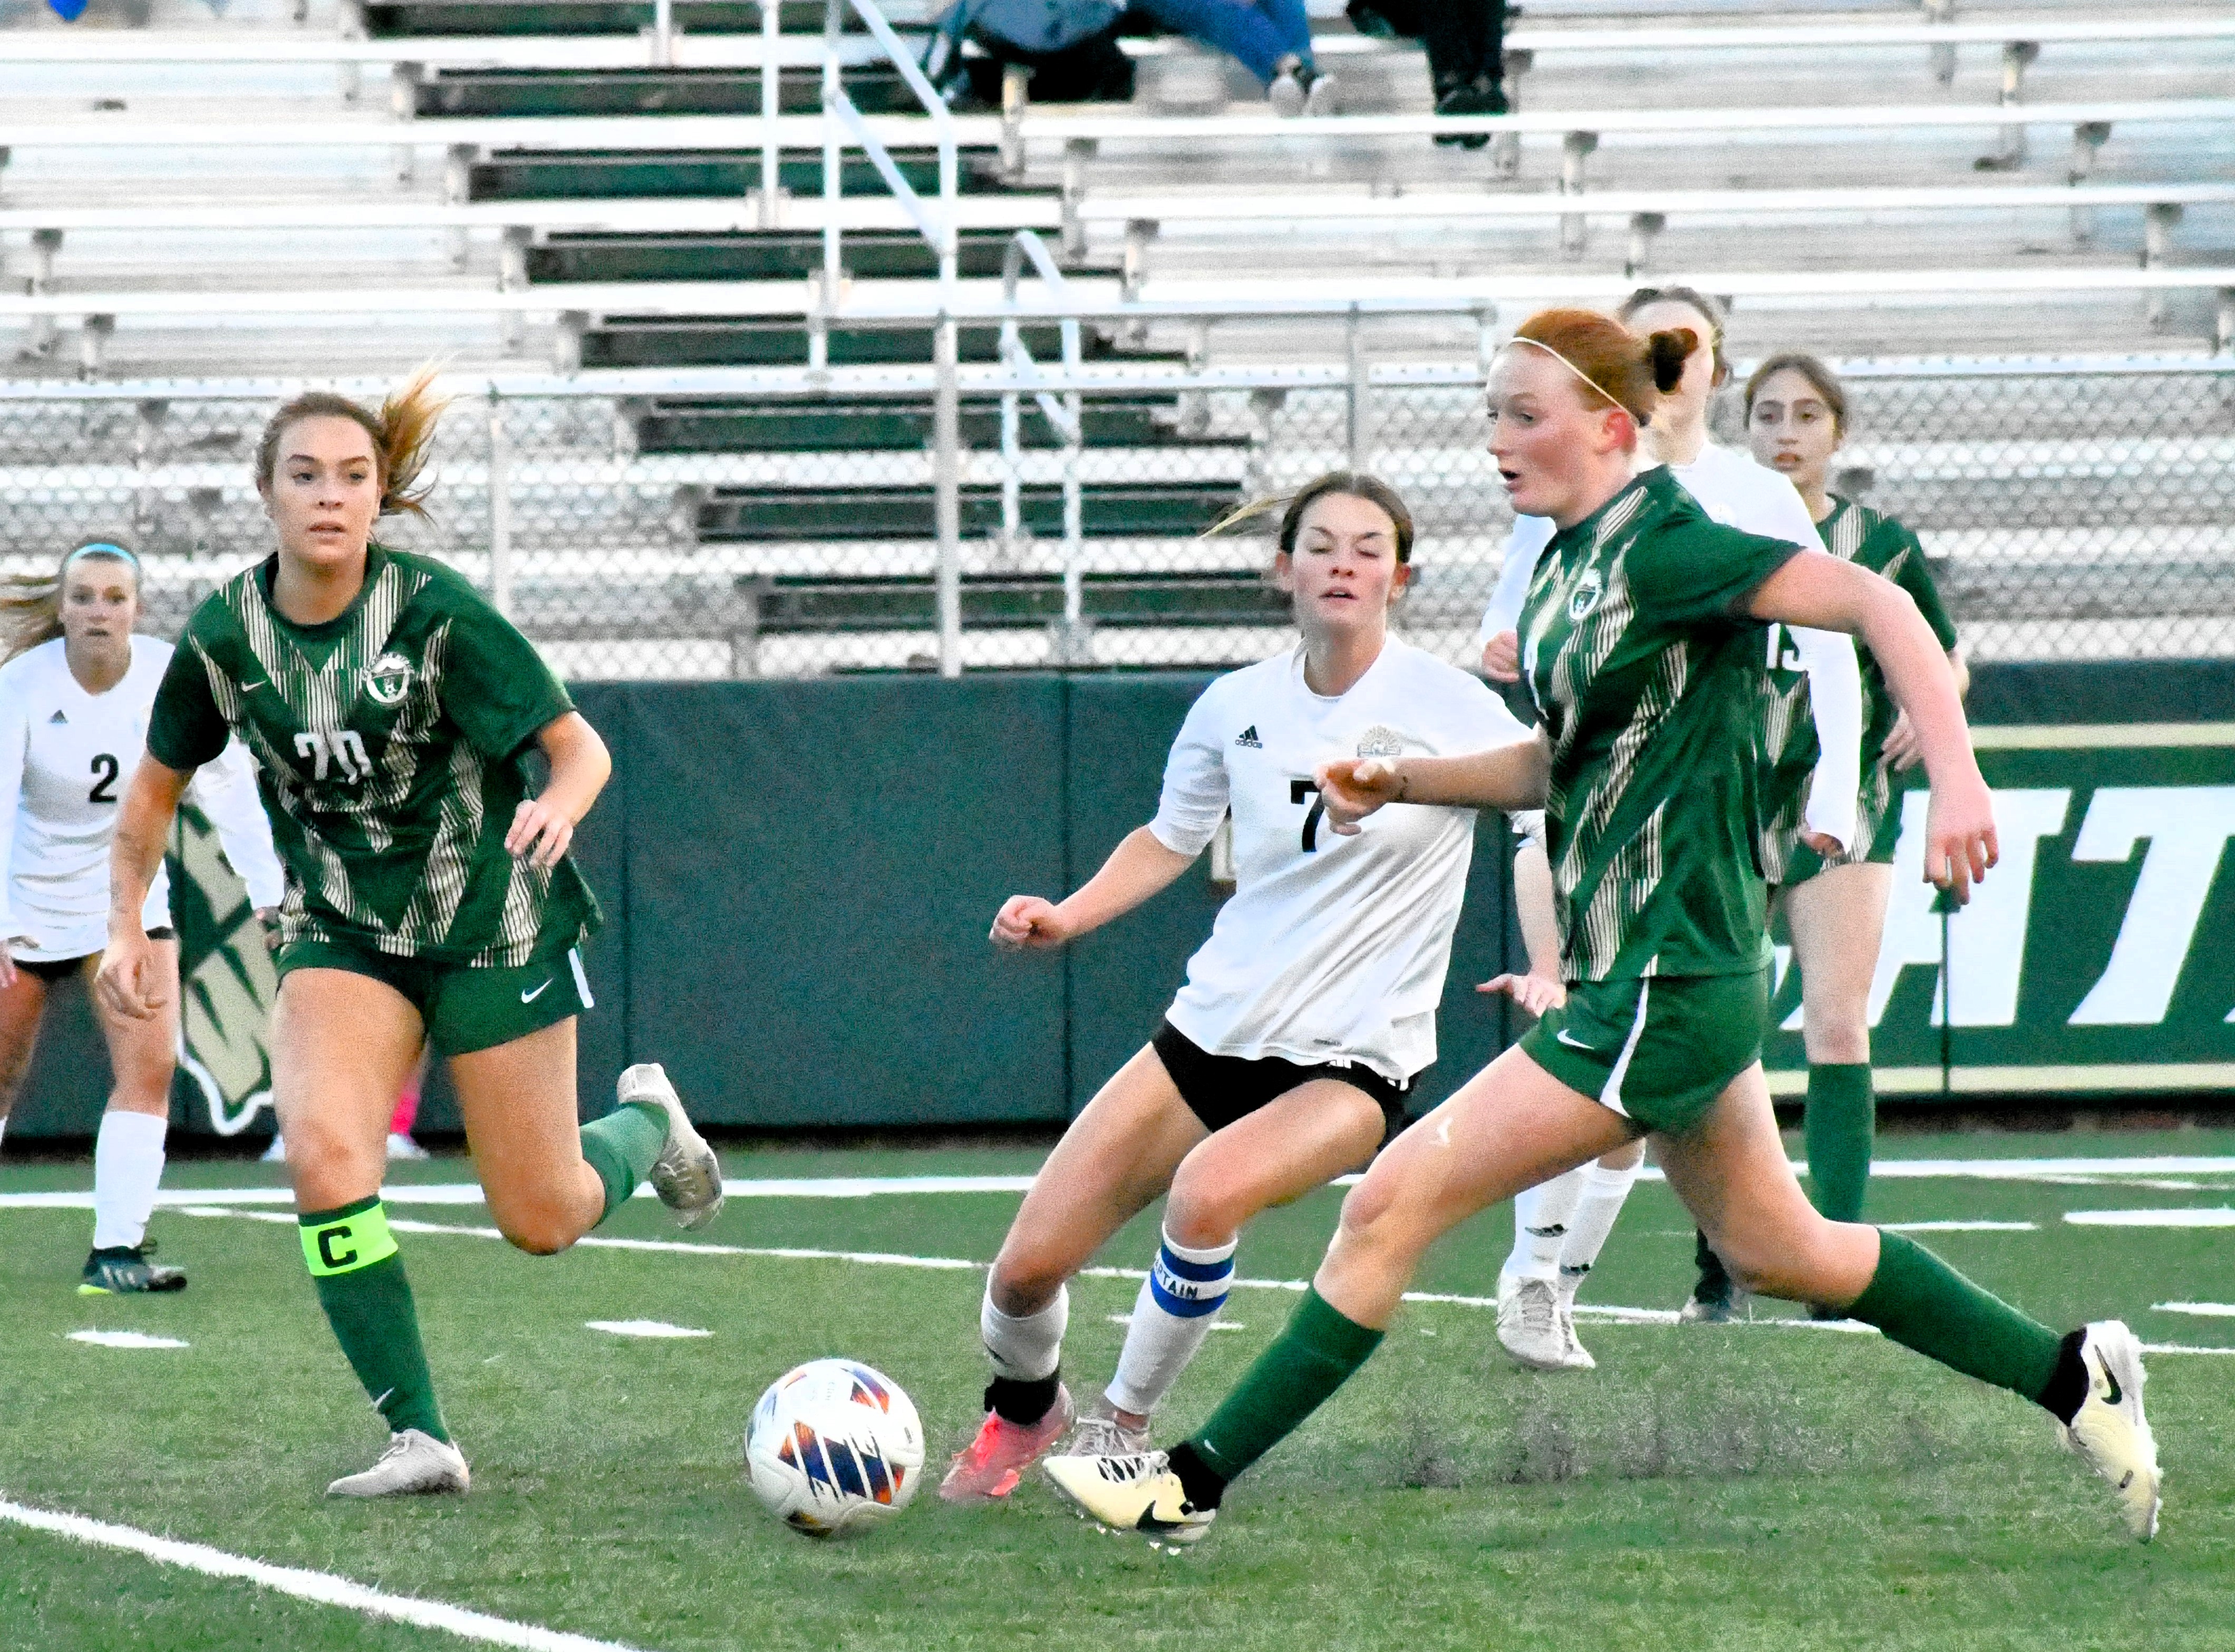 First half surge keeps Lady Copperheads perfect in region play